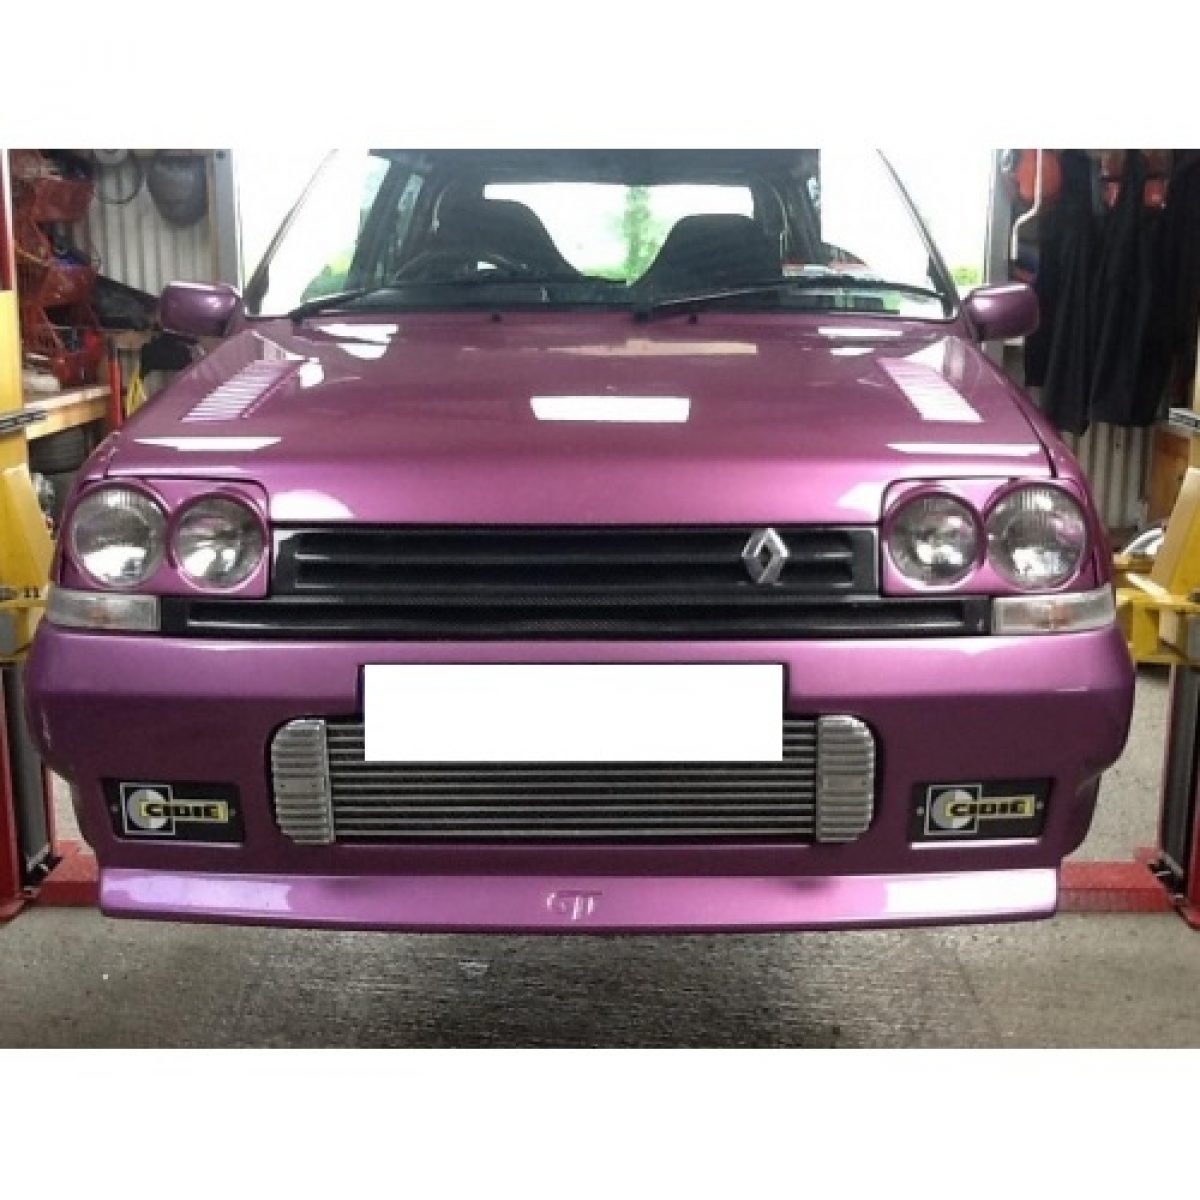 FRONT GRILL RENAULT 5 GT TURBO (84-96) PHASE II